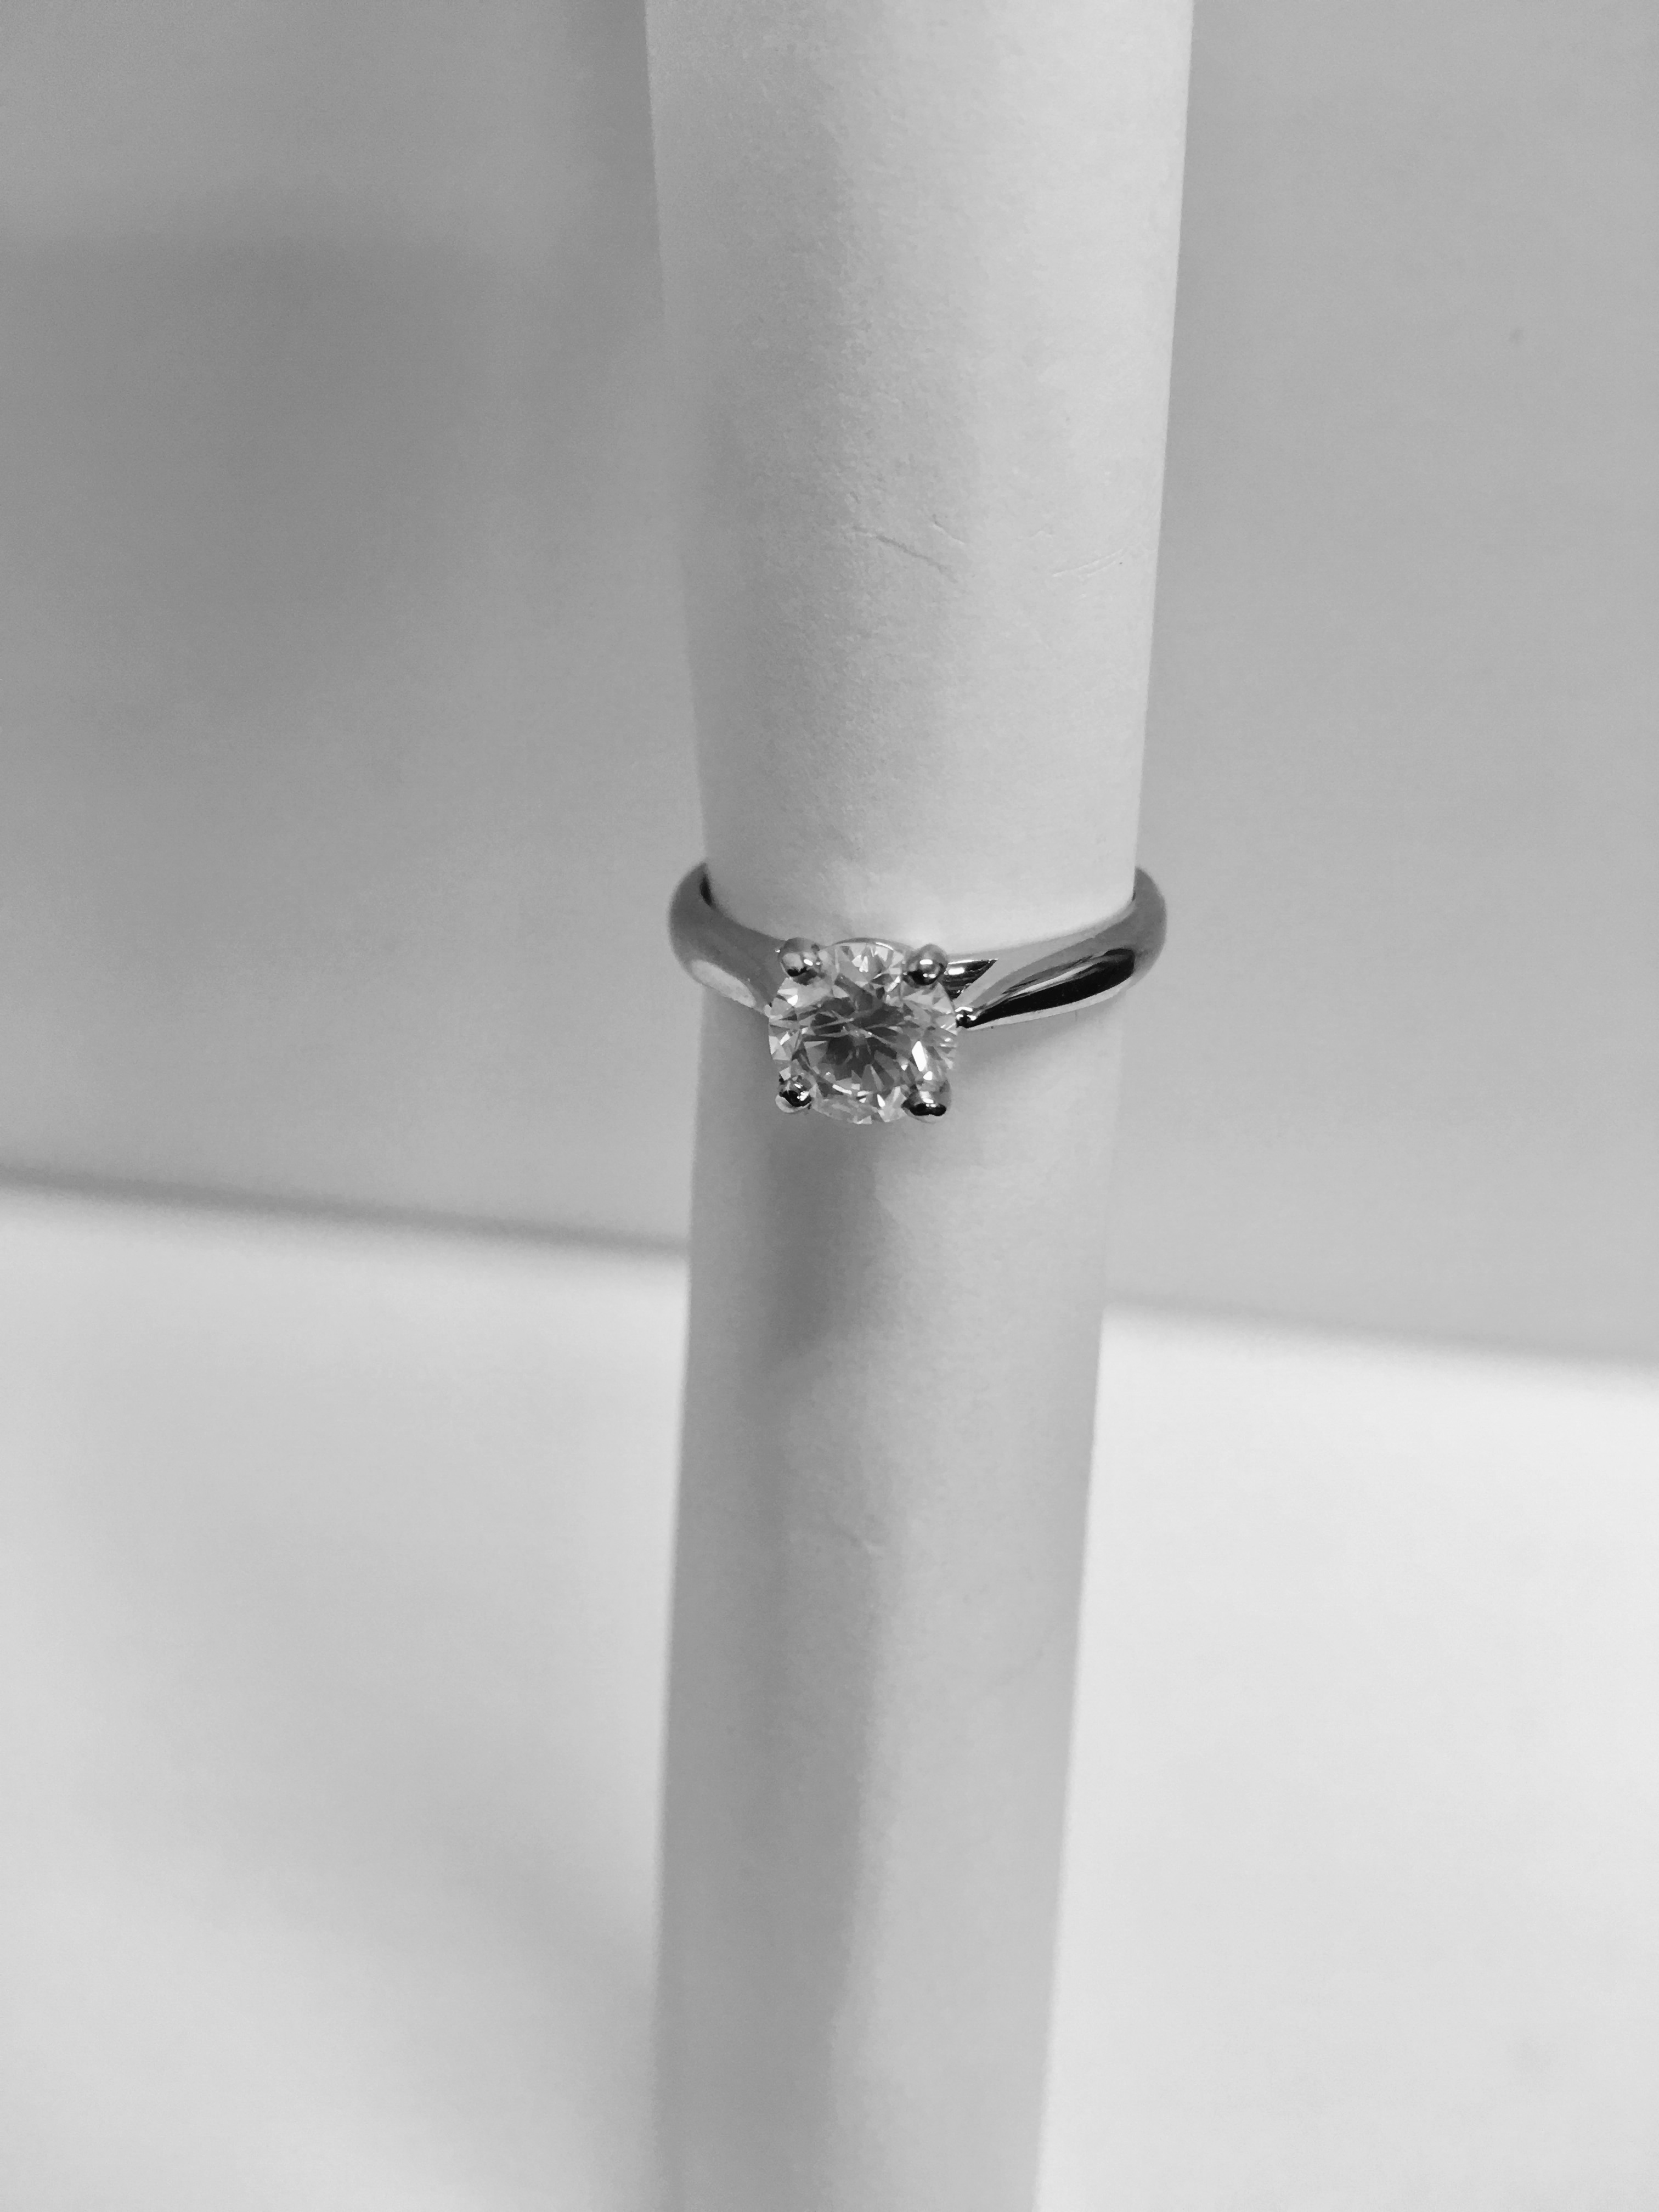 1.16ct diamond solitaire ring with a brilliant cut diamond - Image 2 of 5